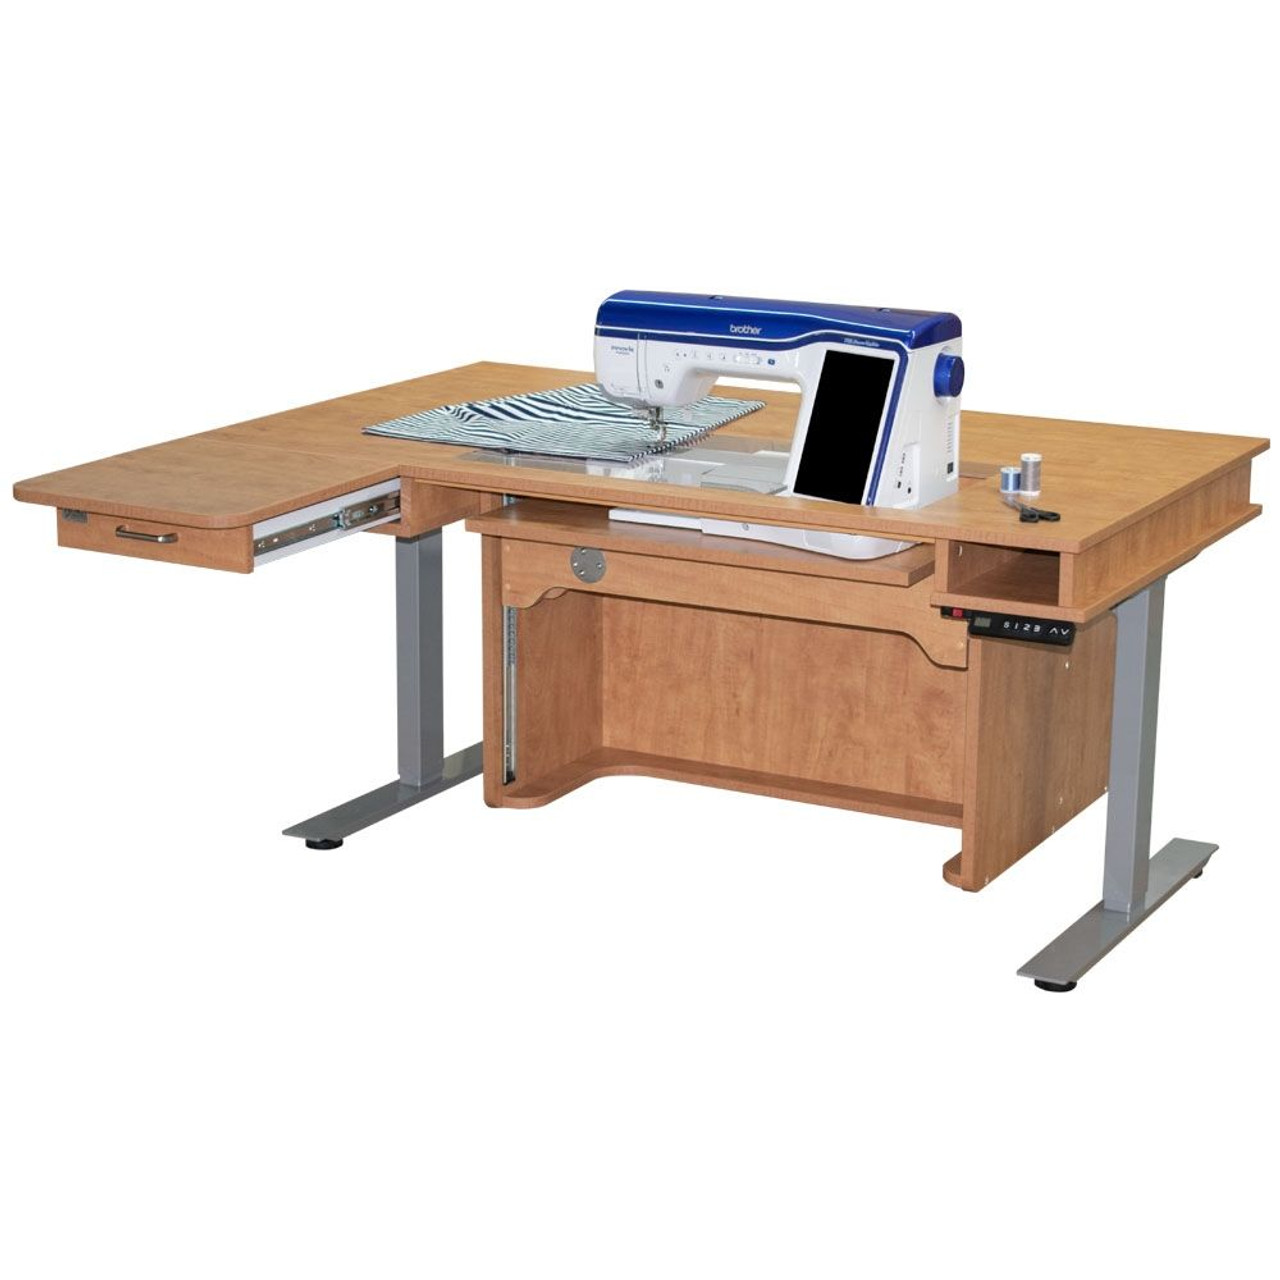 Model 9000: New Heights Adjustable Sewing Table - Sunrise Maple